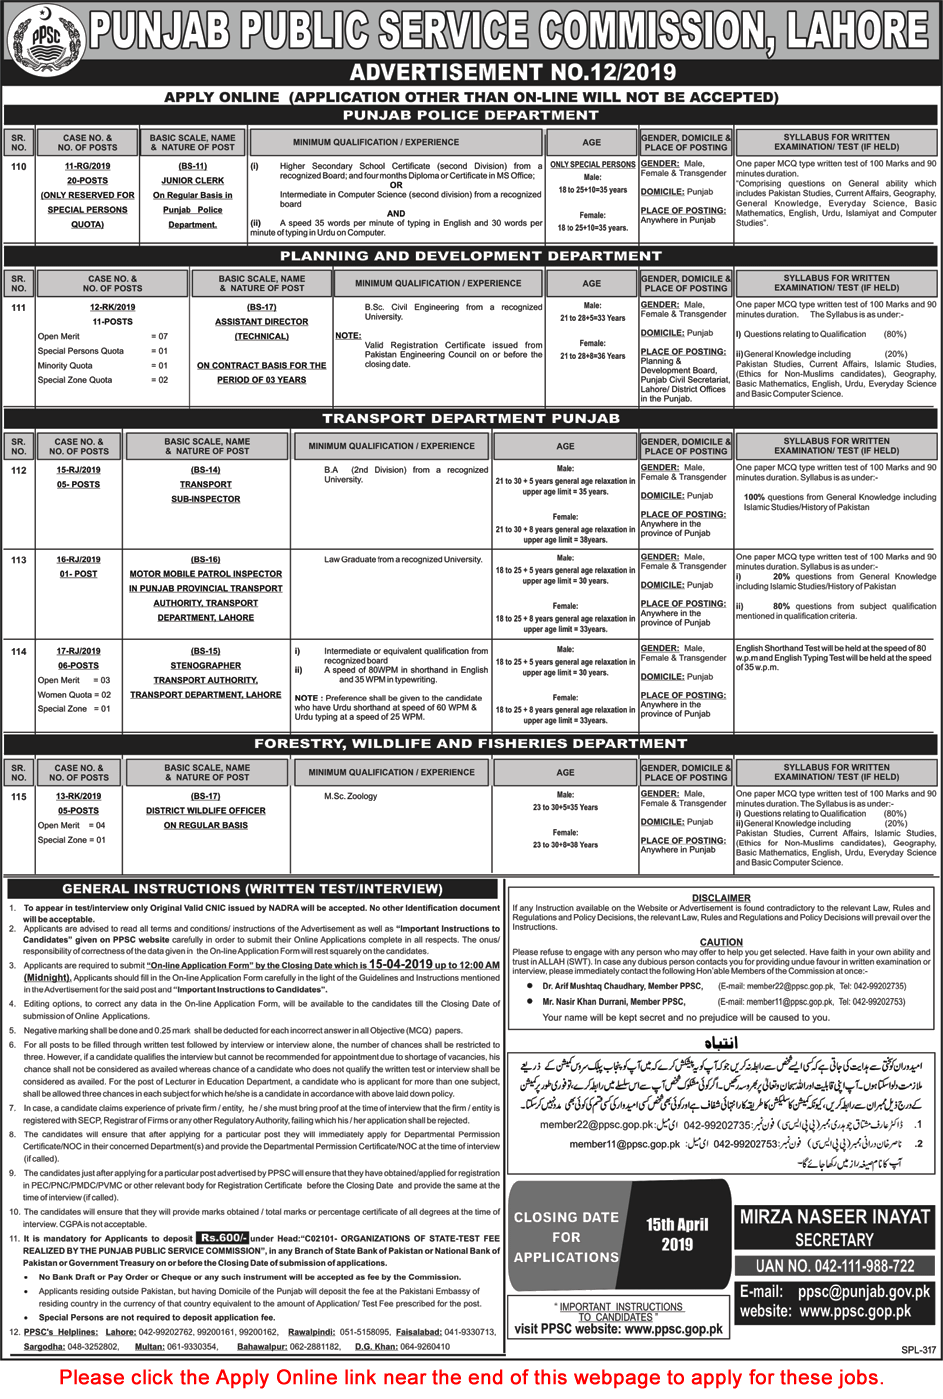 PPSC Jobs March 2019 April Apply Online Consolidated Advertisement No 12/2019 Latest